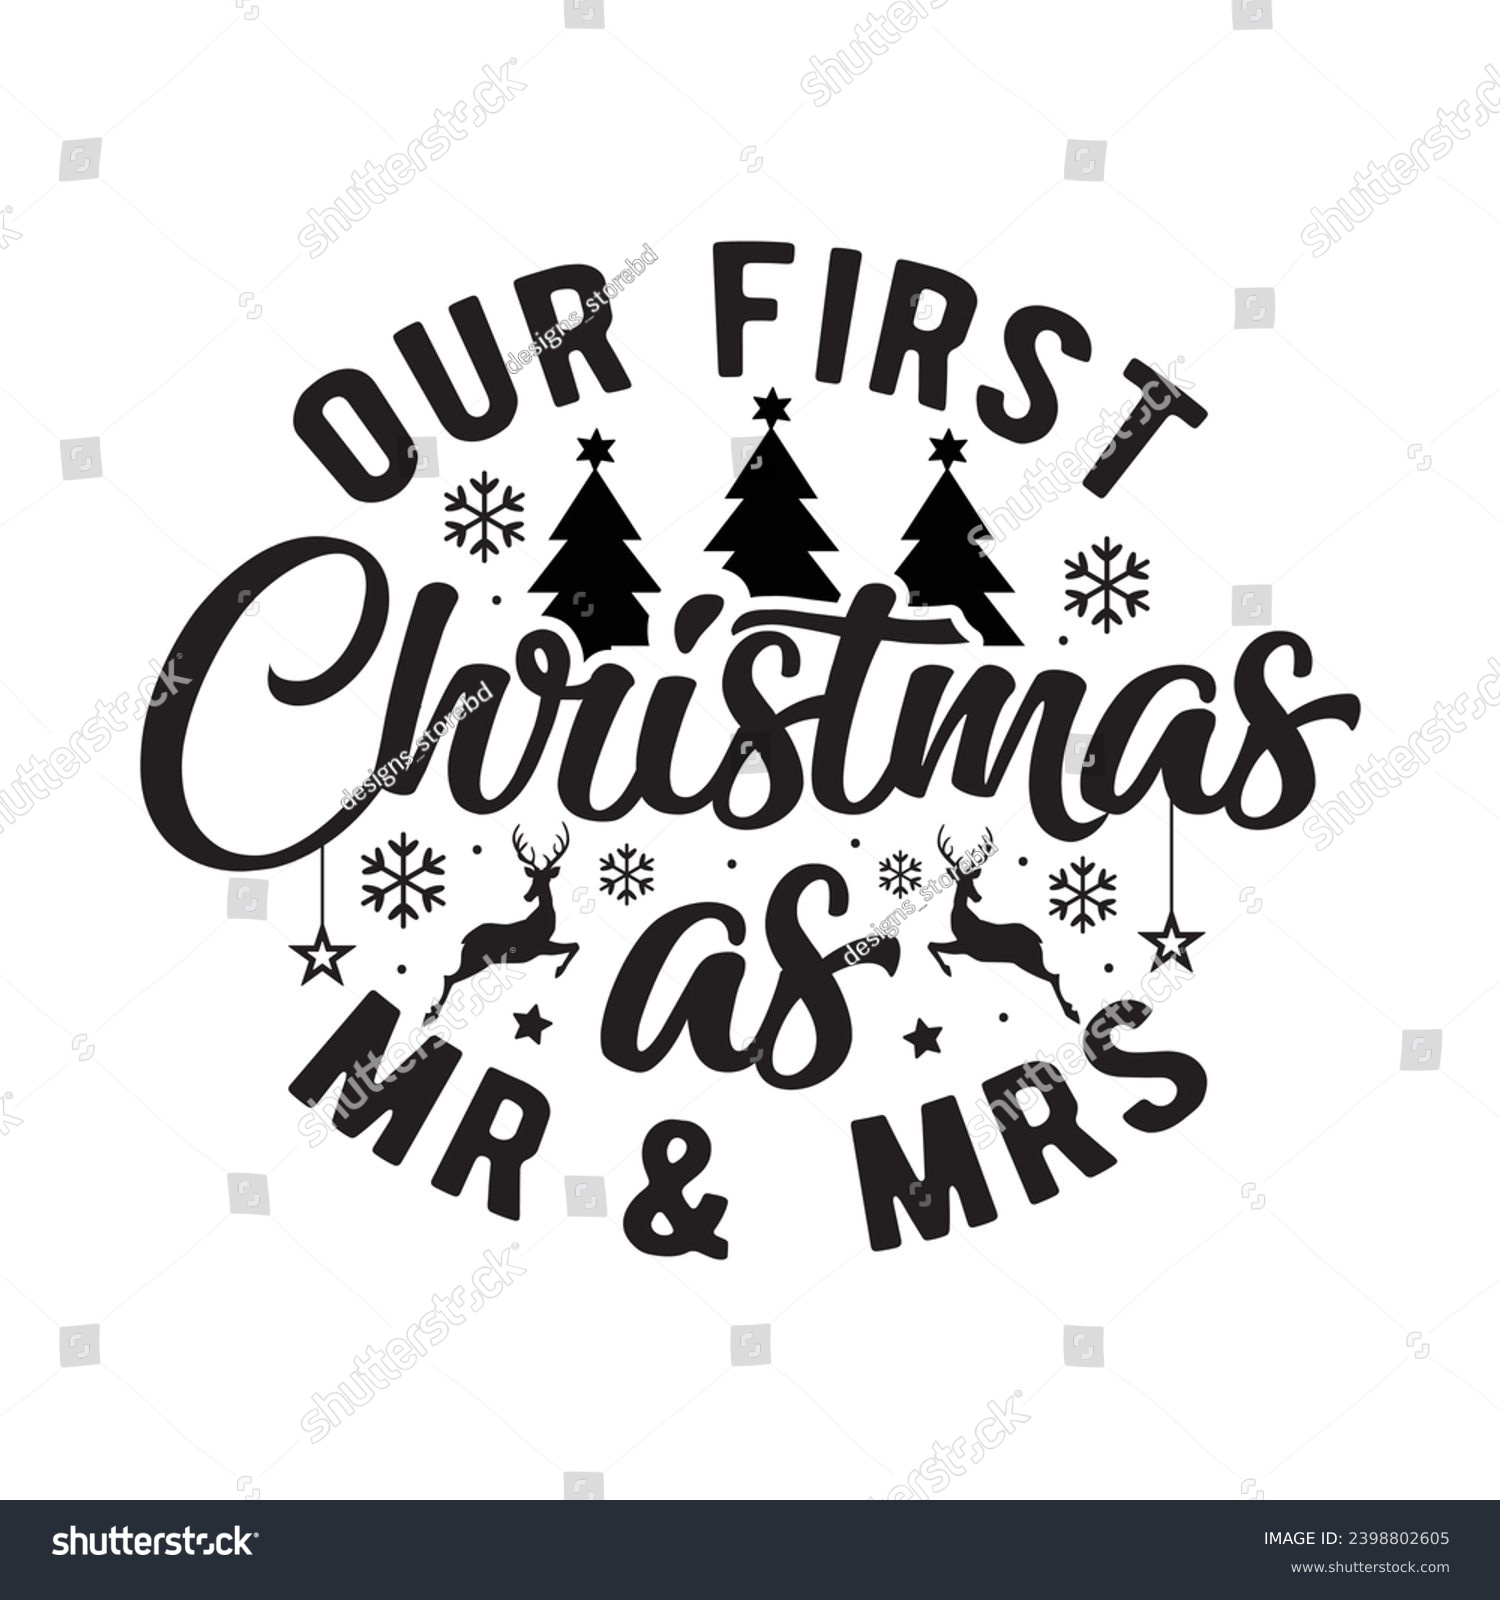 SVG of our first christmas as mr  mrs,Funny Christmas t shirt design Bundle, Christmas, Merry Christmas , Winter, Xmas, Holiday and Santa, Commercial Use, Cut Files Cricut, Silhouette, eps, dxf, png svg